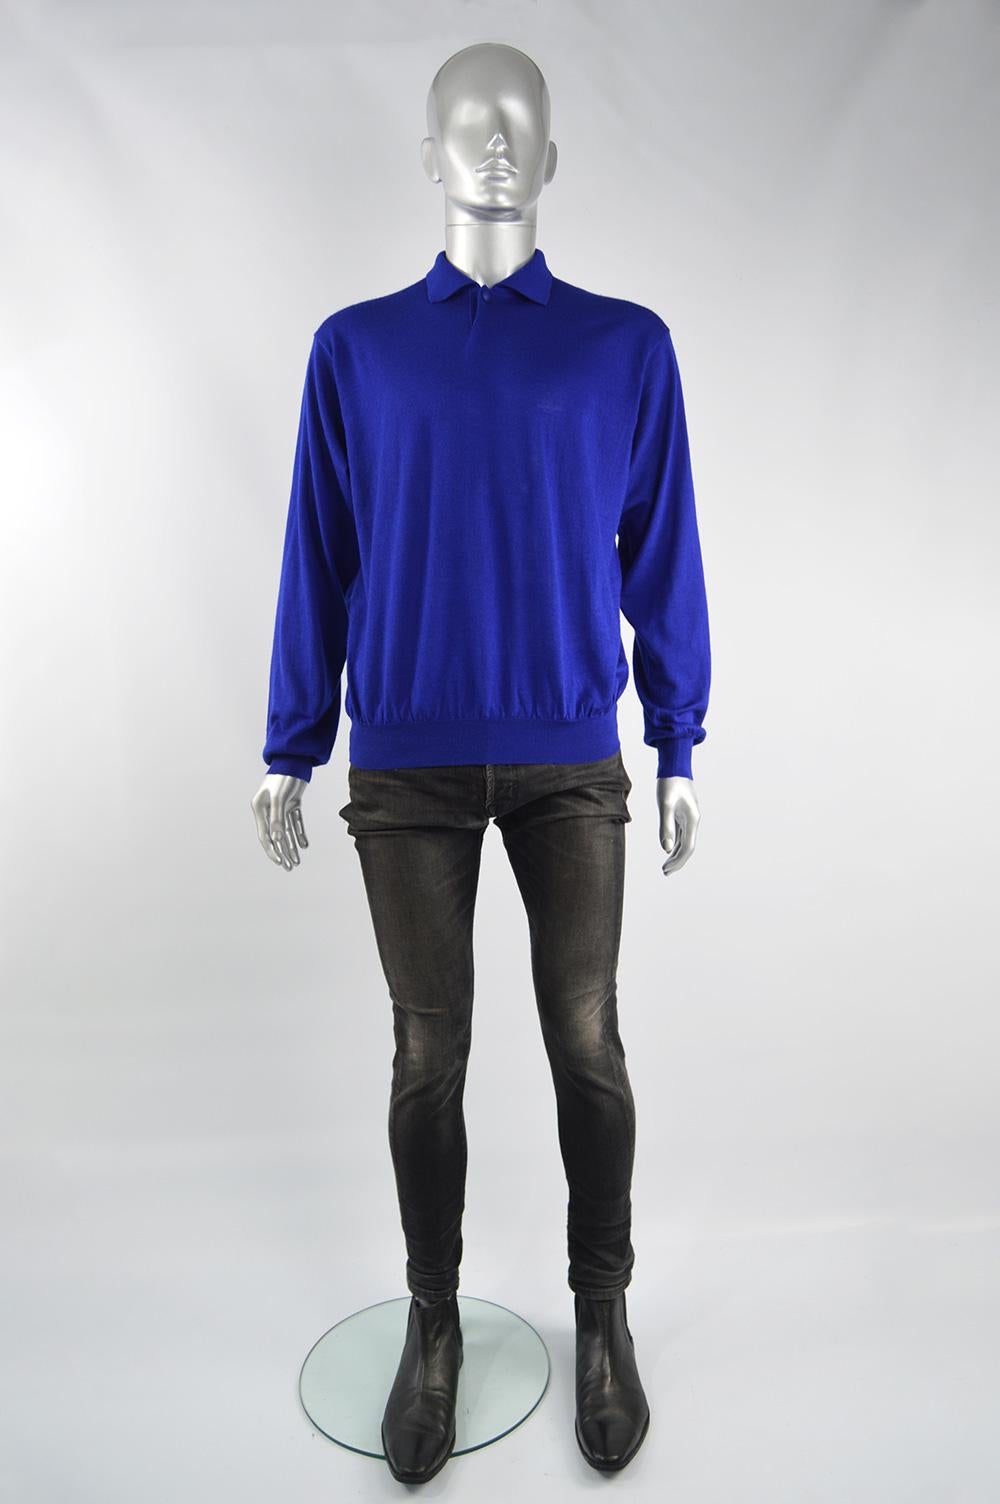 A stylish vintage Gianni Versace mens sweater from the 90s for the 'Couture' line. In a royal blue cashmere, silk and wool knit fabric with a polo shirt style collar and a Medusa logo button at the neck. 

Size: Marked IV / IT 50 which is roughly a